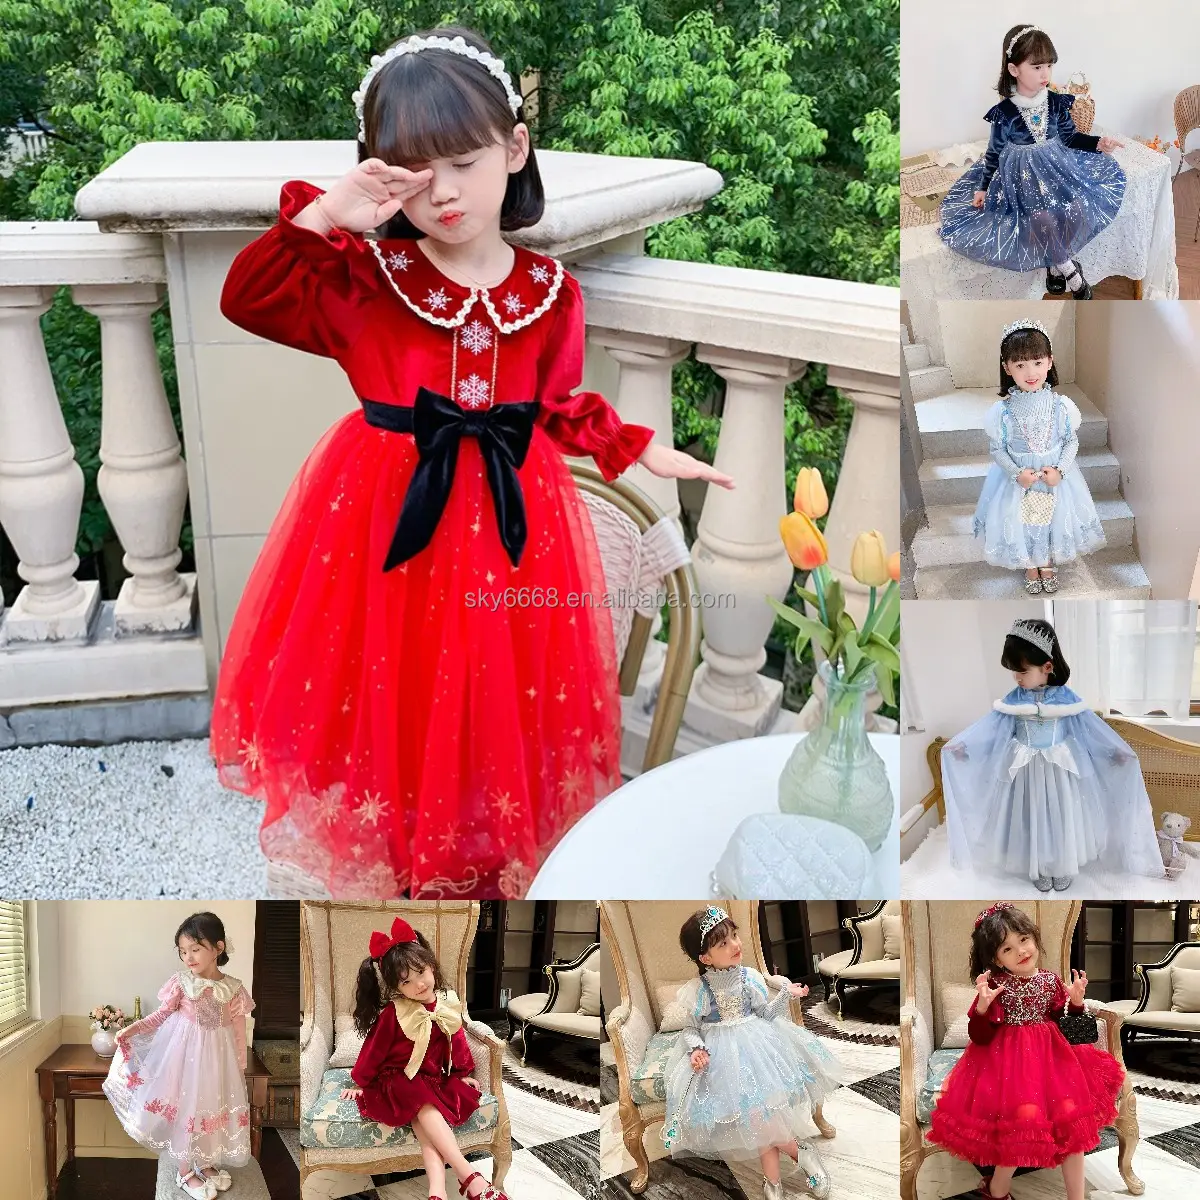 Elegant Princess Lace Dress Girl Flower Embroidery Vintage Children's Christmas Party Red Ball Dress